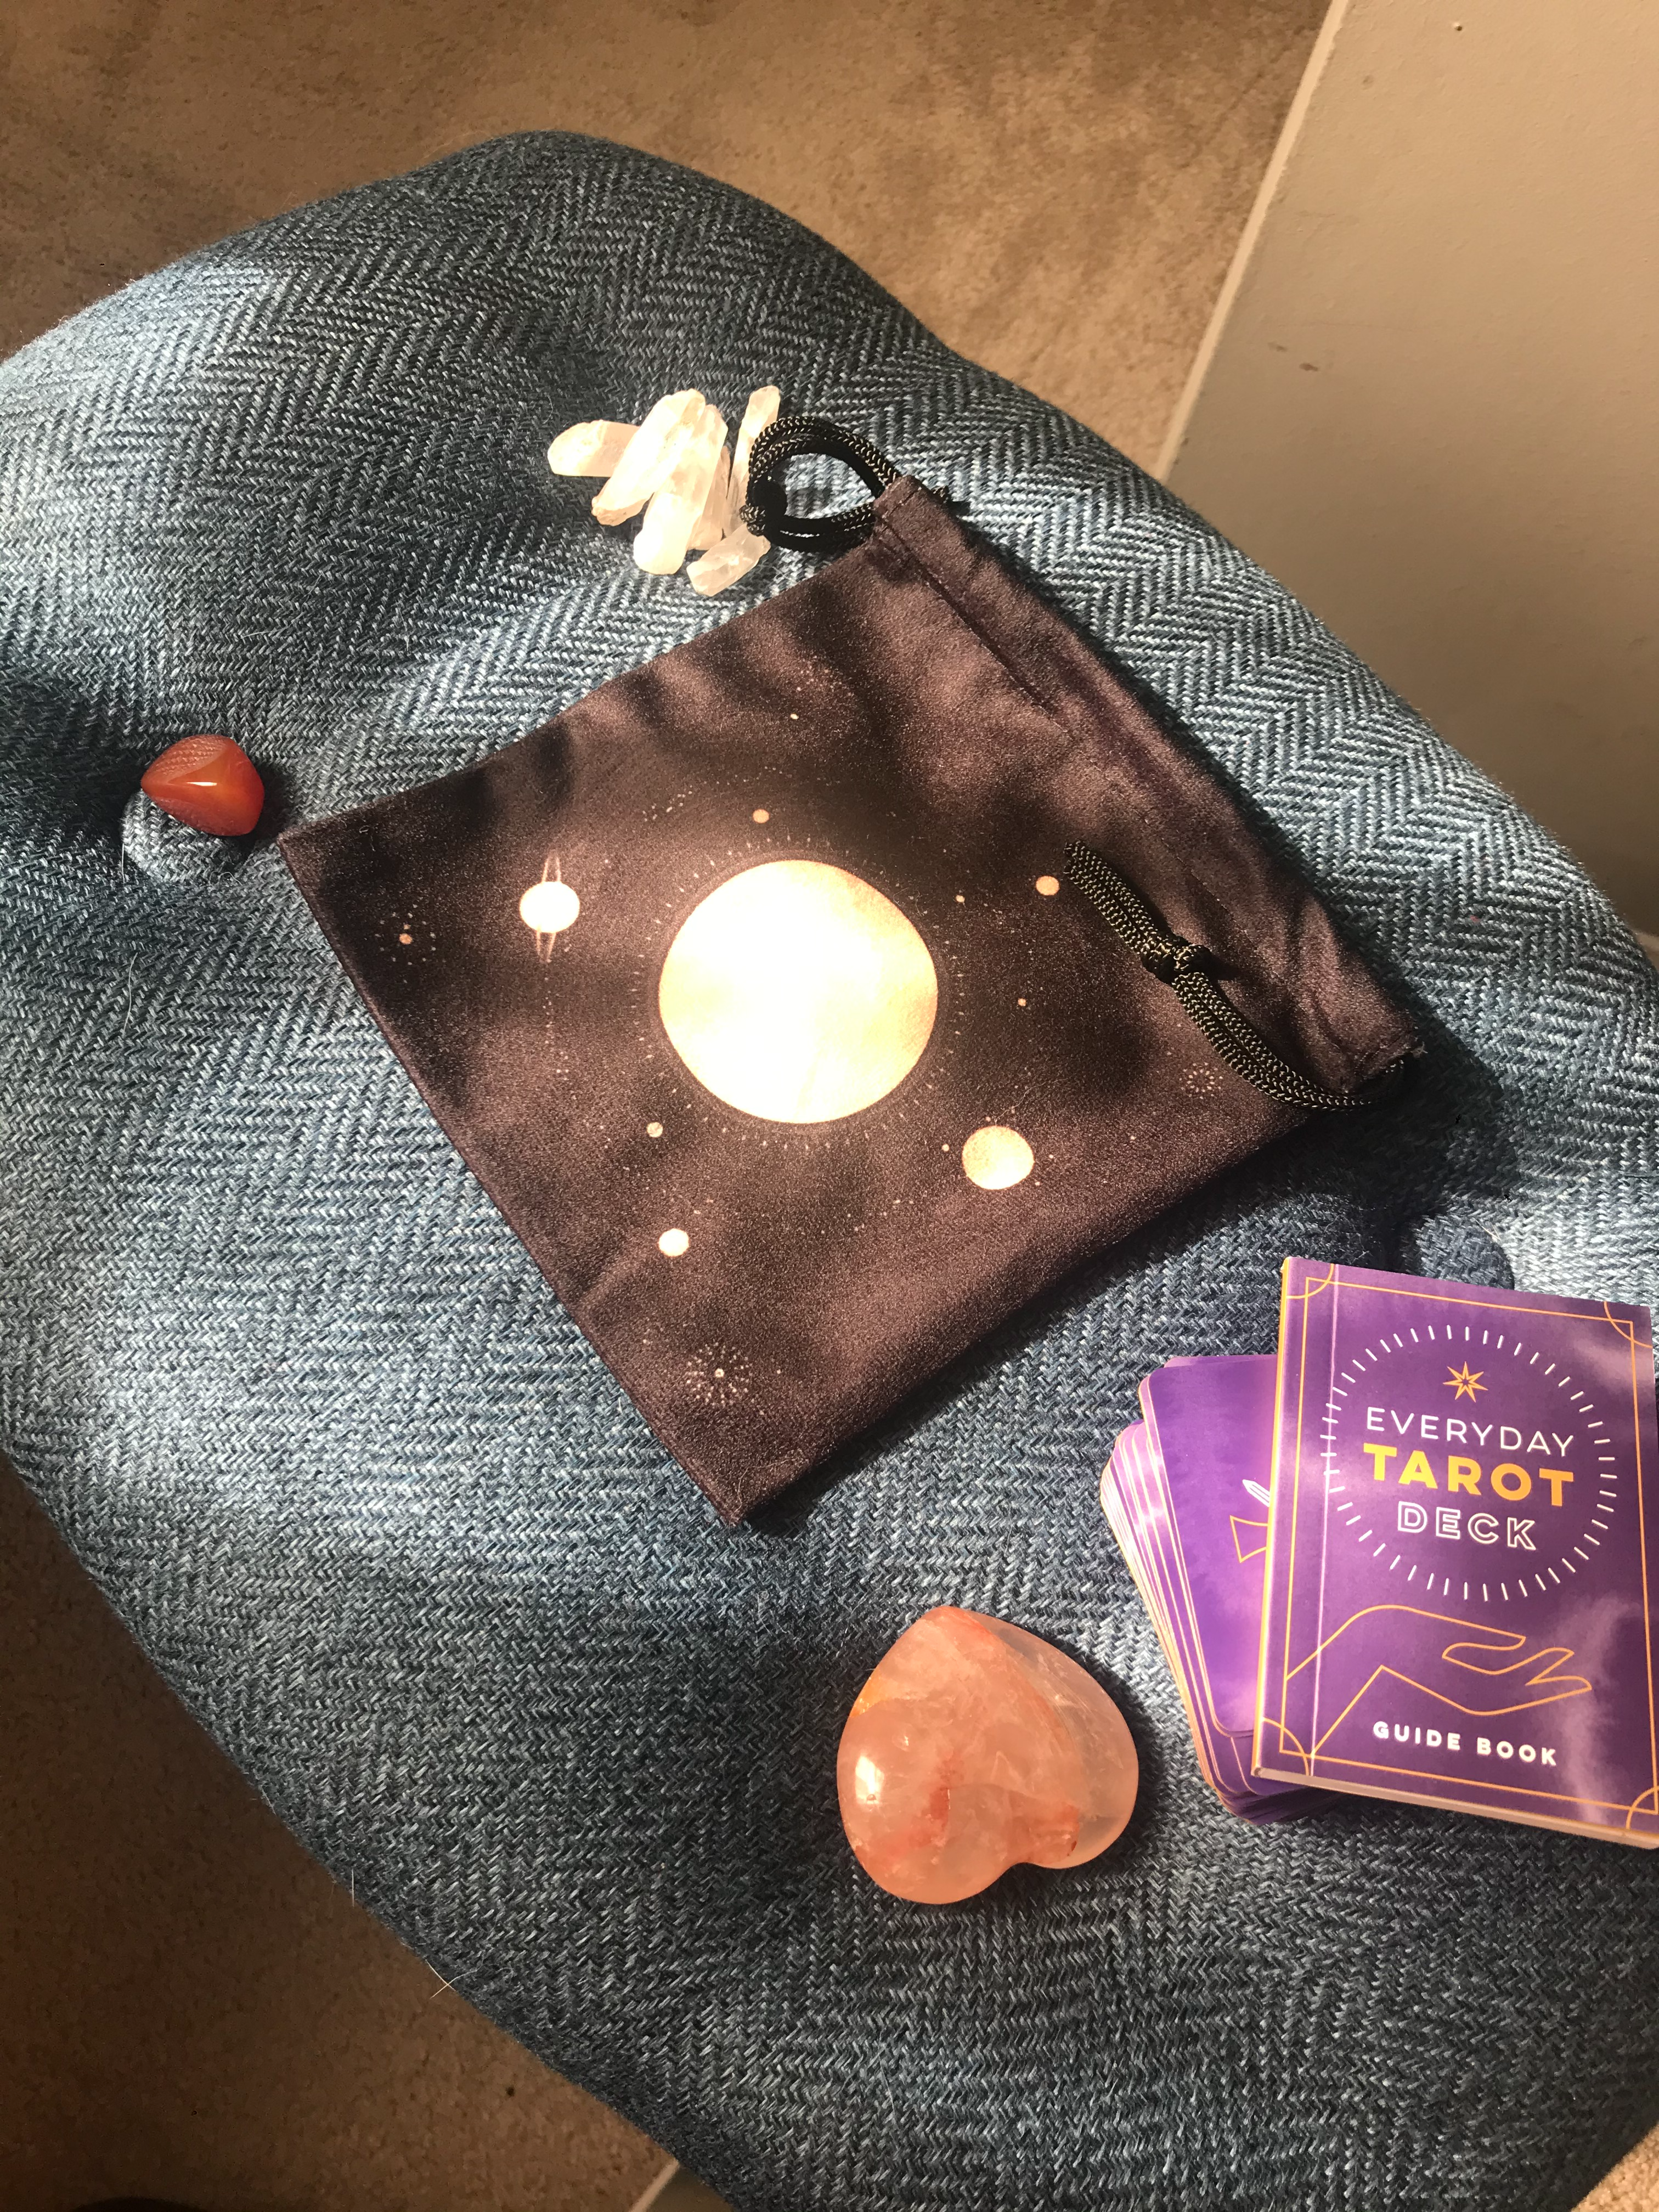 Velvet bag, SMALL: Planets and Solar System, Small 6 inches x 6.5 inches tall, Black Velvet